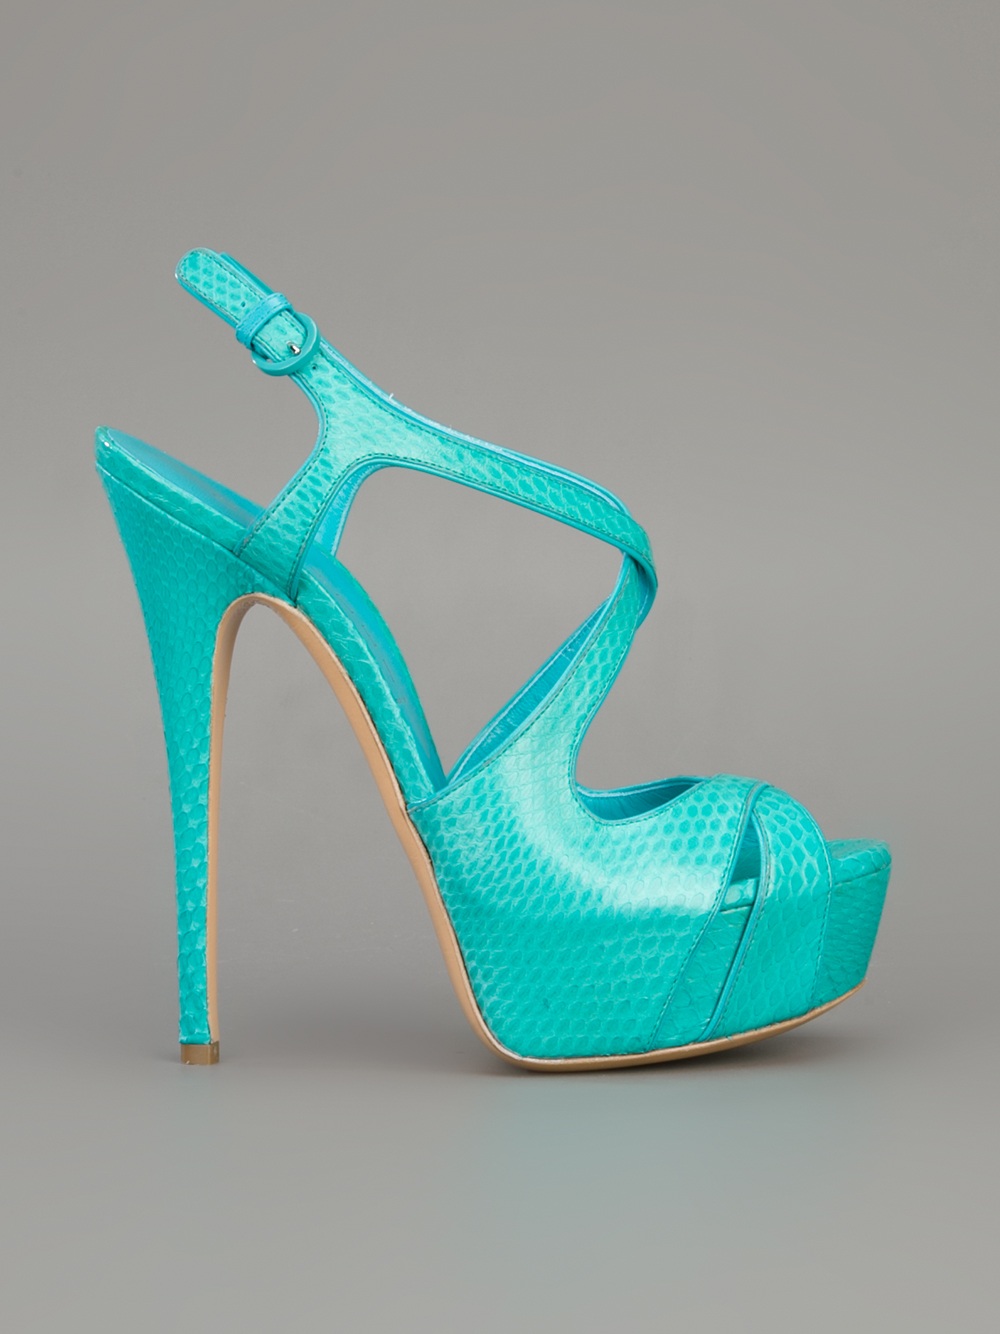 Lyst - Casadei Ankle Strap Sandals in Blue